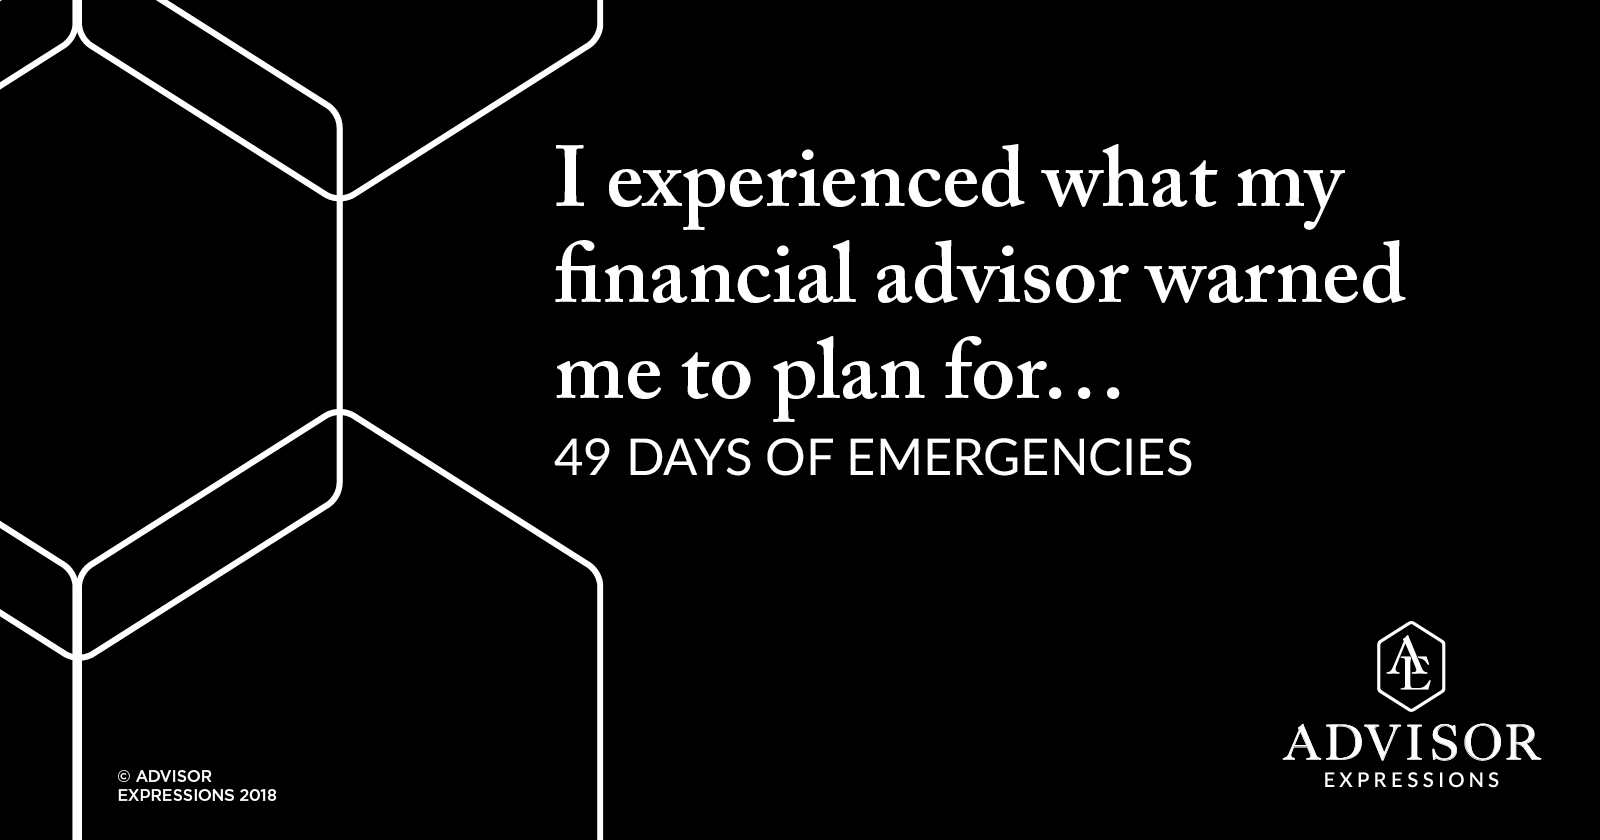 I experienced what my financial advisor warned me to plan for…